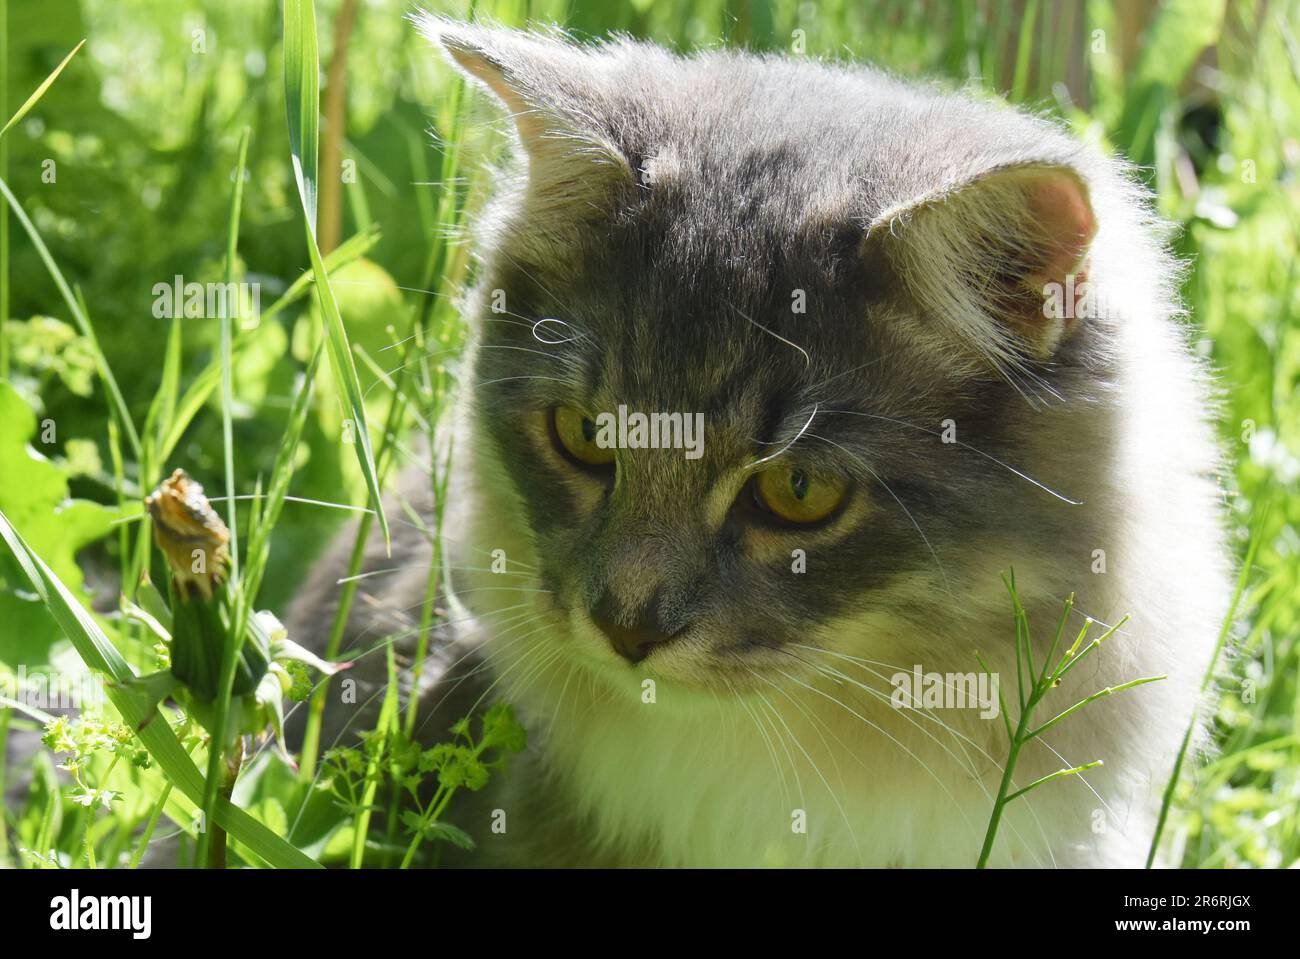 gray purebreed Siberian cat outdoor in a flower field Stock Photo